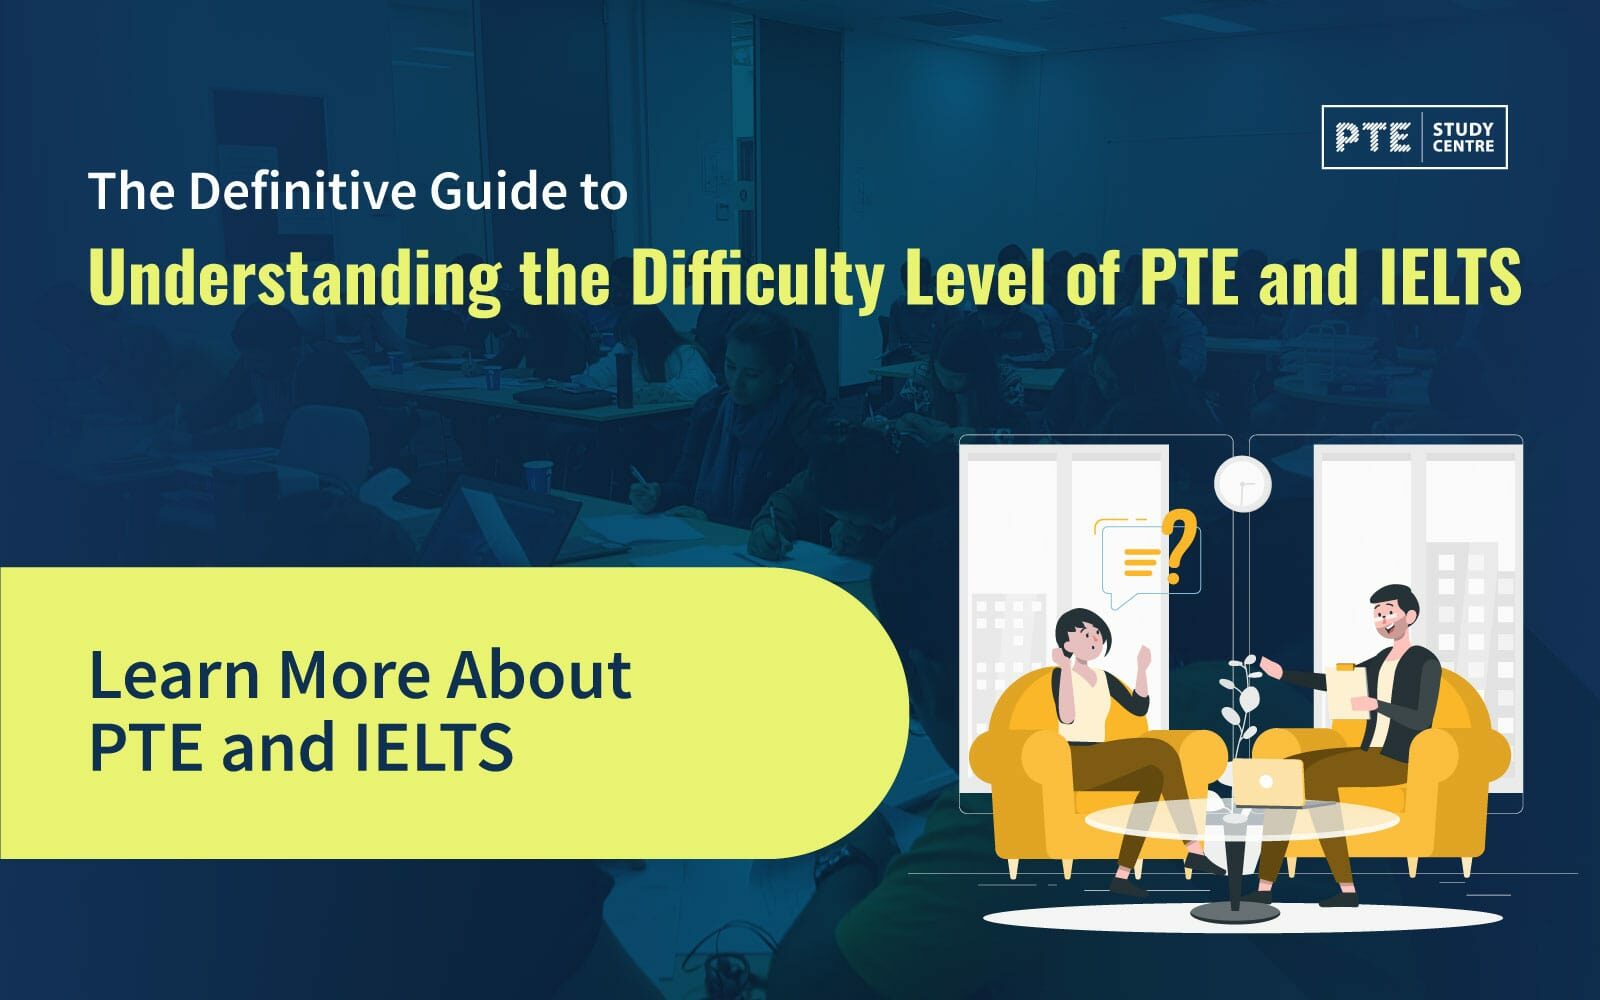 The Definitive Guide to Understanding the Difficulty Level of PTE and IELTS